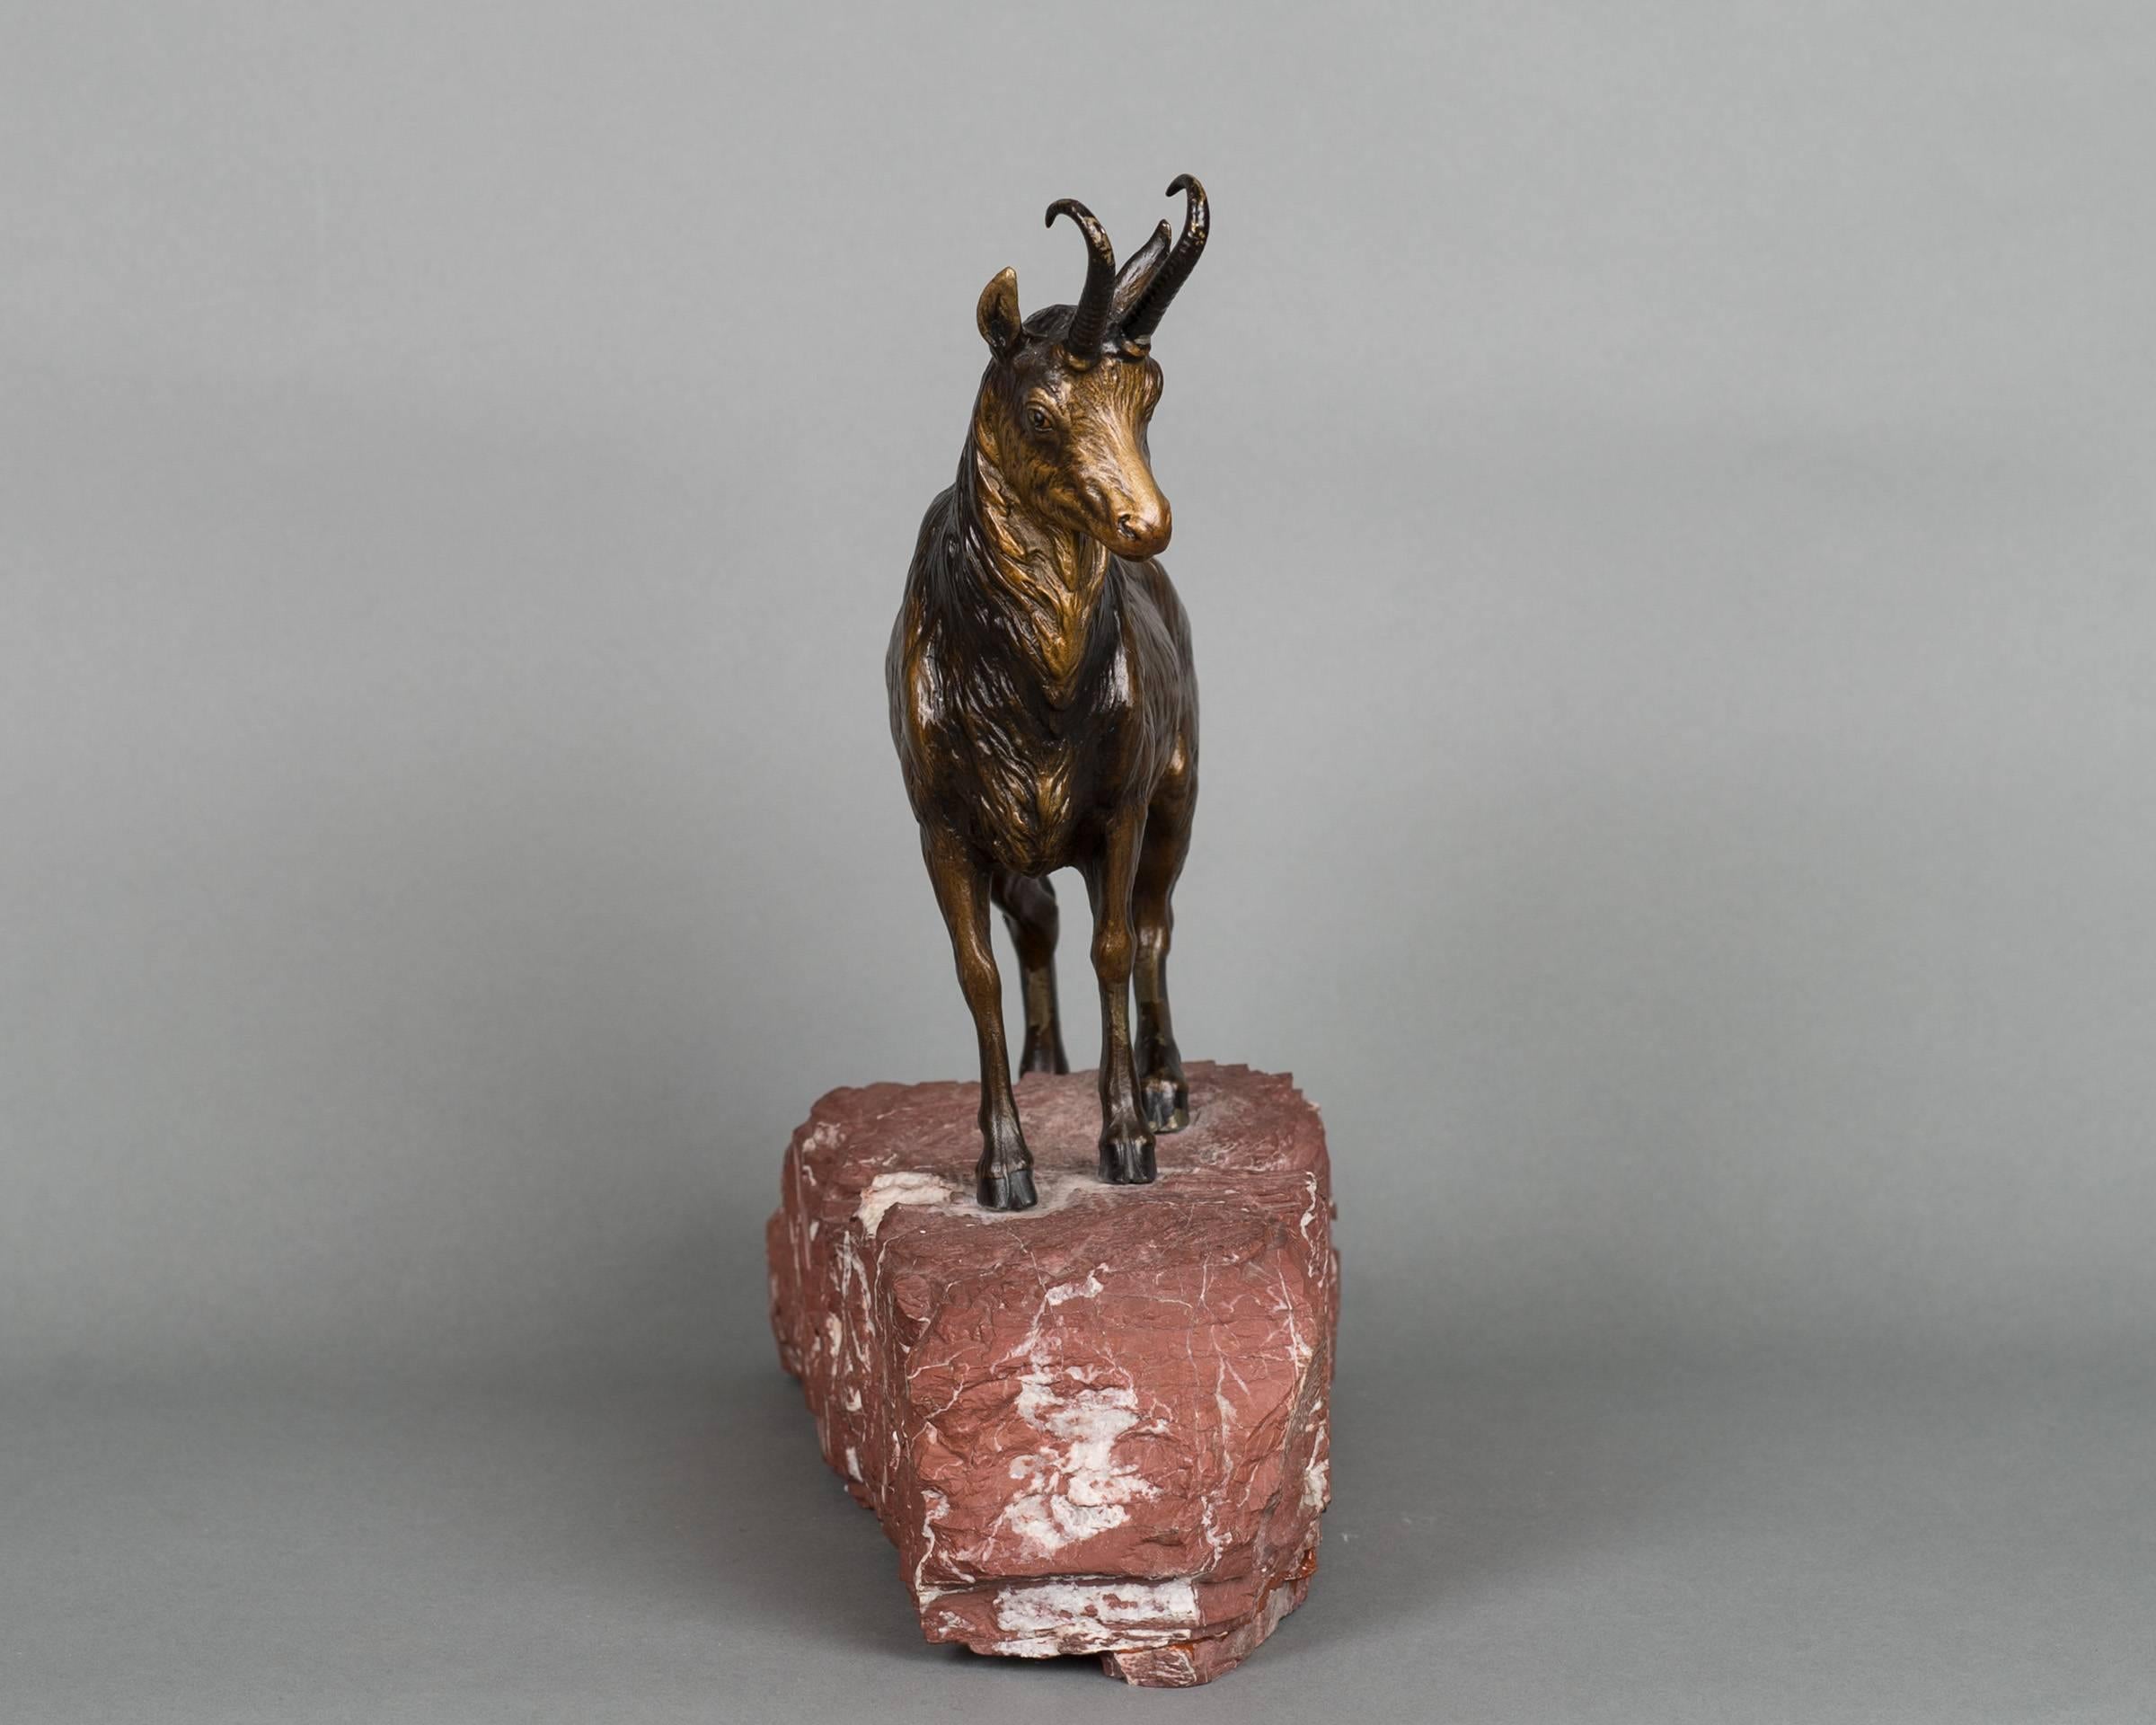 A very realistic, detailed multicolored Vienna bronze of mountain goat mounted on the red marble base with white stripes, circa 1890.